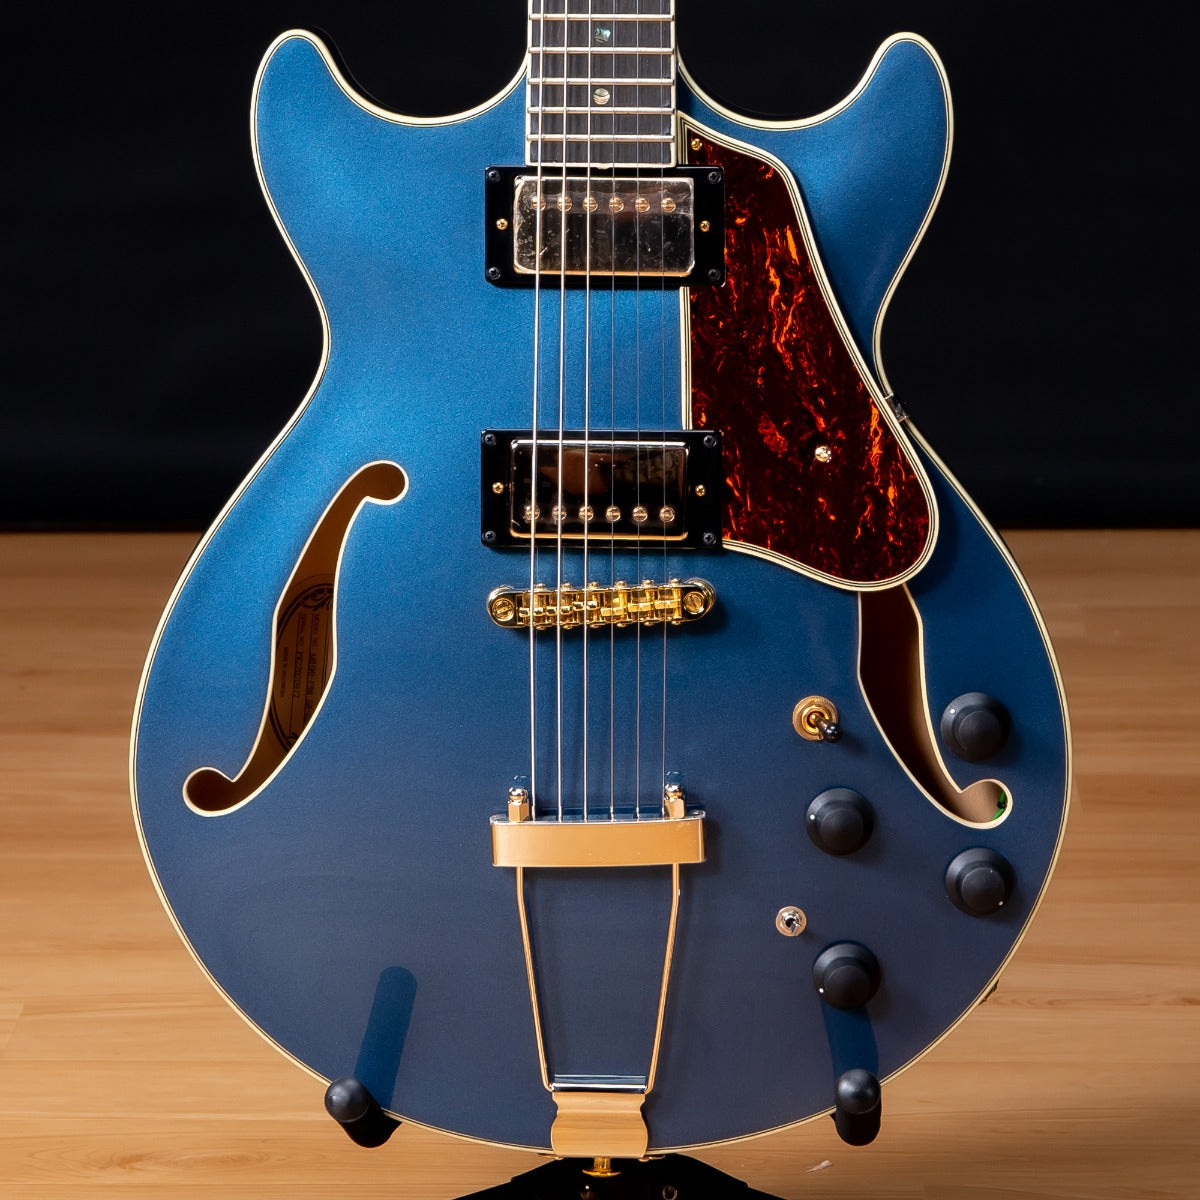 Ibanez AMH90 AM Artcore Expressionist Semi-Hollow Electric Guitar -  Prussian Blue Metallic SN 22020977